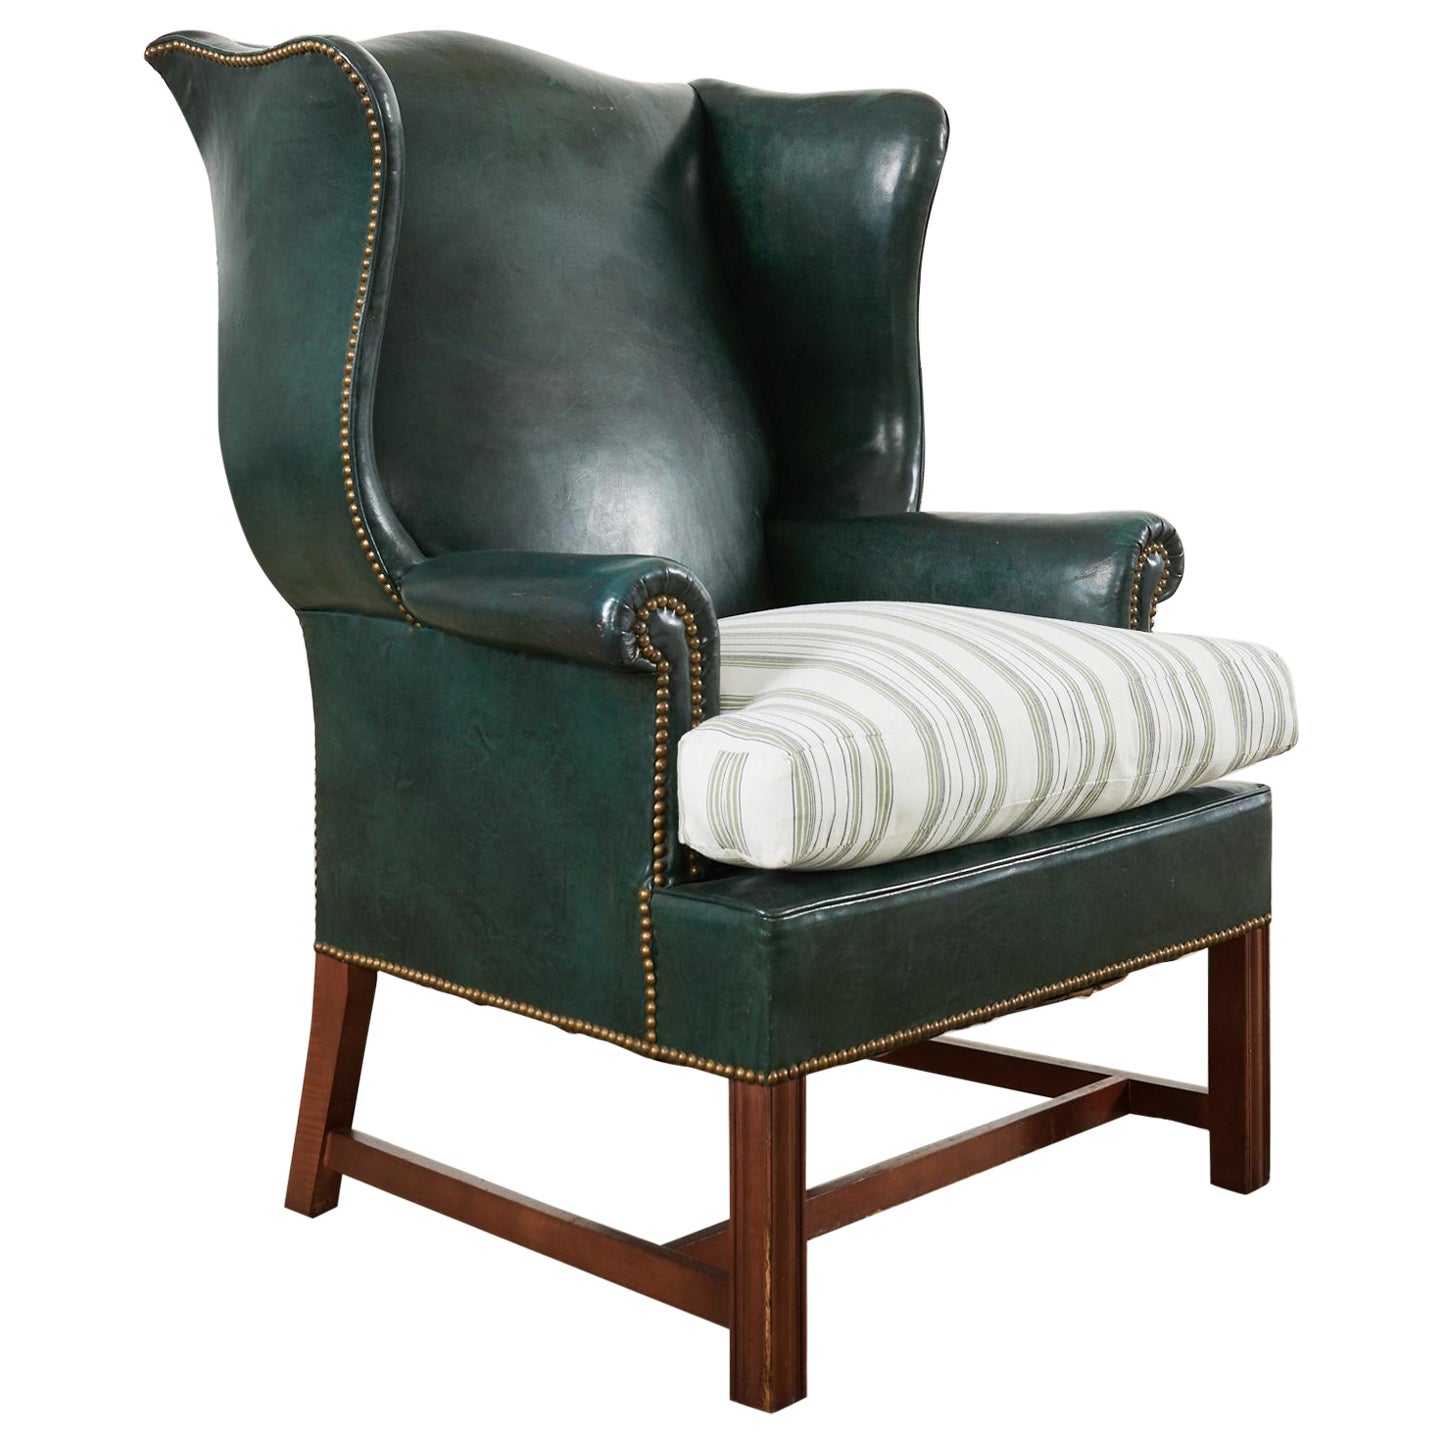 Georgian Style Mahogany Hunter Green Leather Wingback Chair For Sale